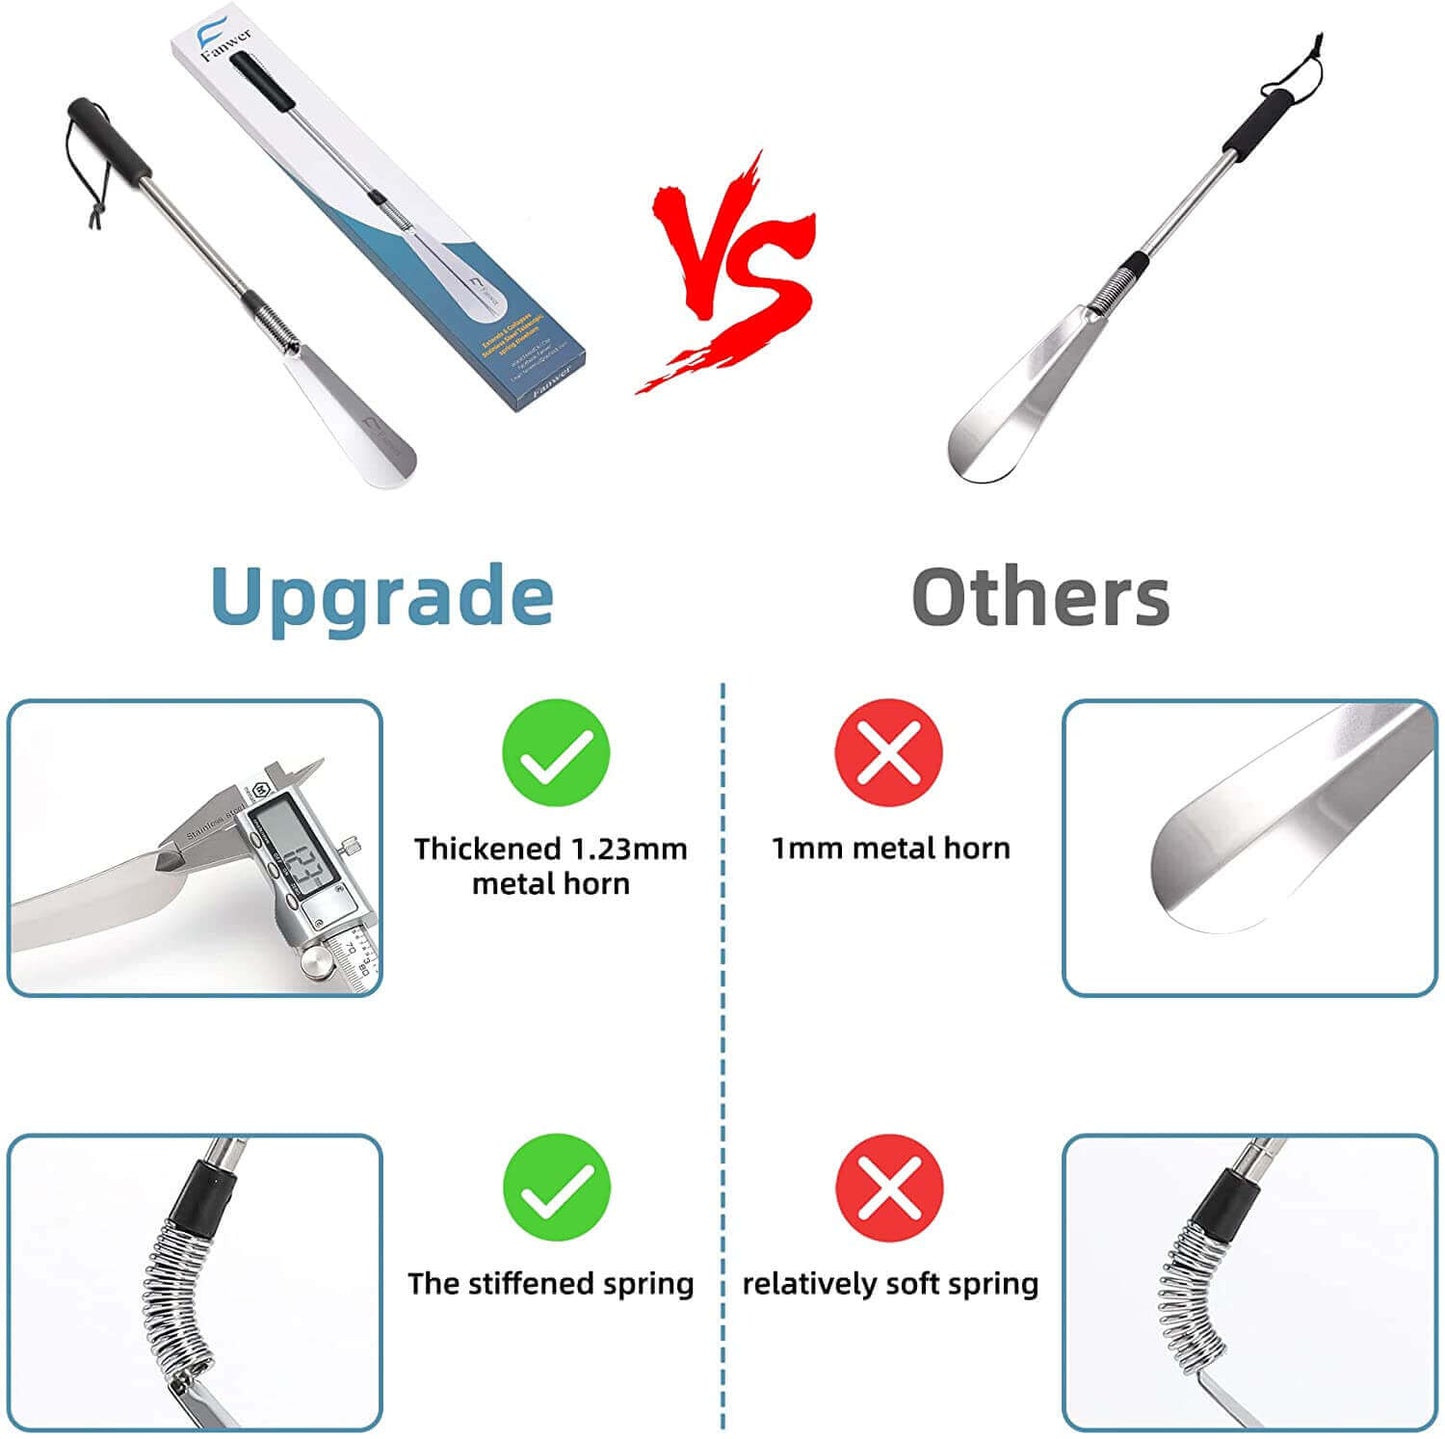 Premium Metal Shoe Horn with Long Handle, Made of Stainless Steel, image of comparing fanwer's with other brands